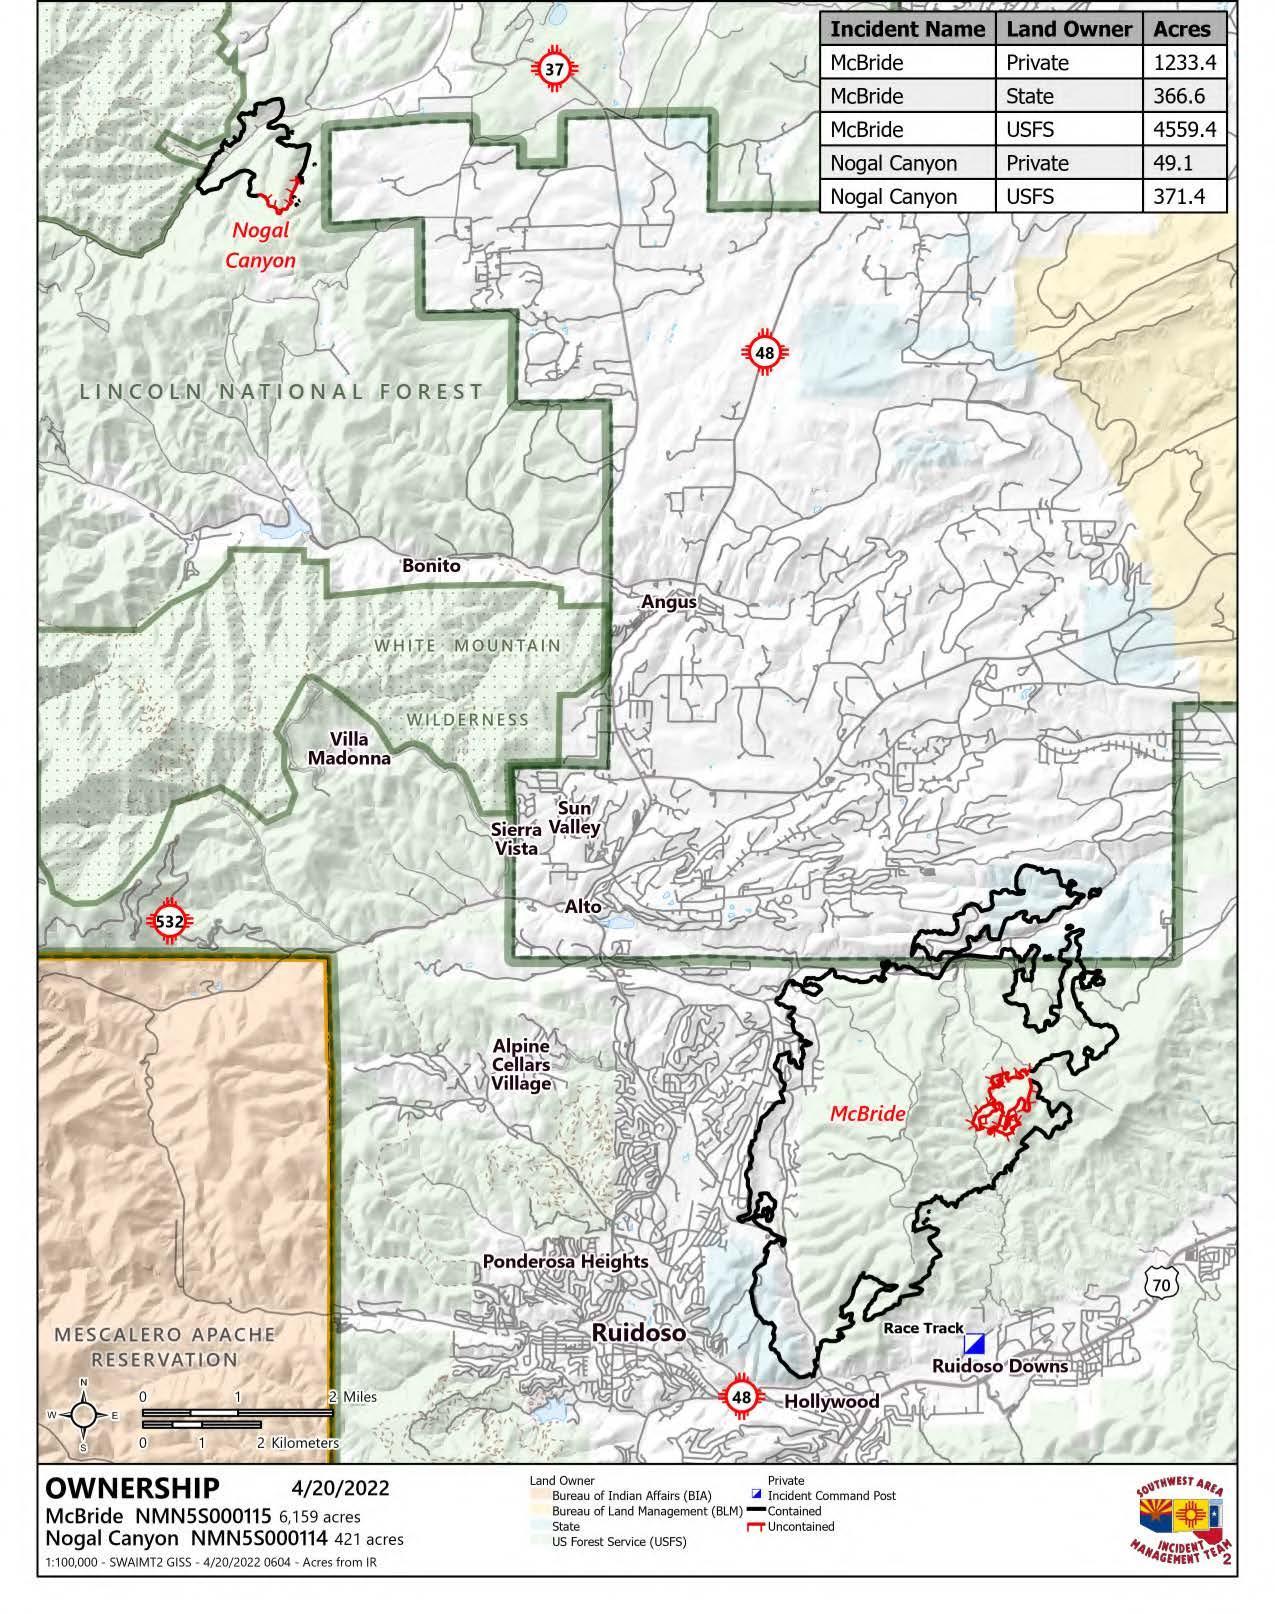 McBride Fire Ownership Map